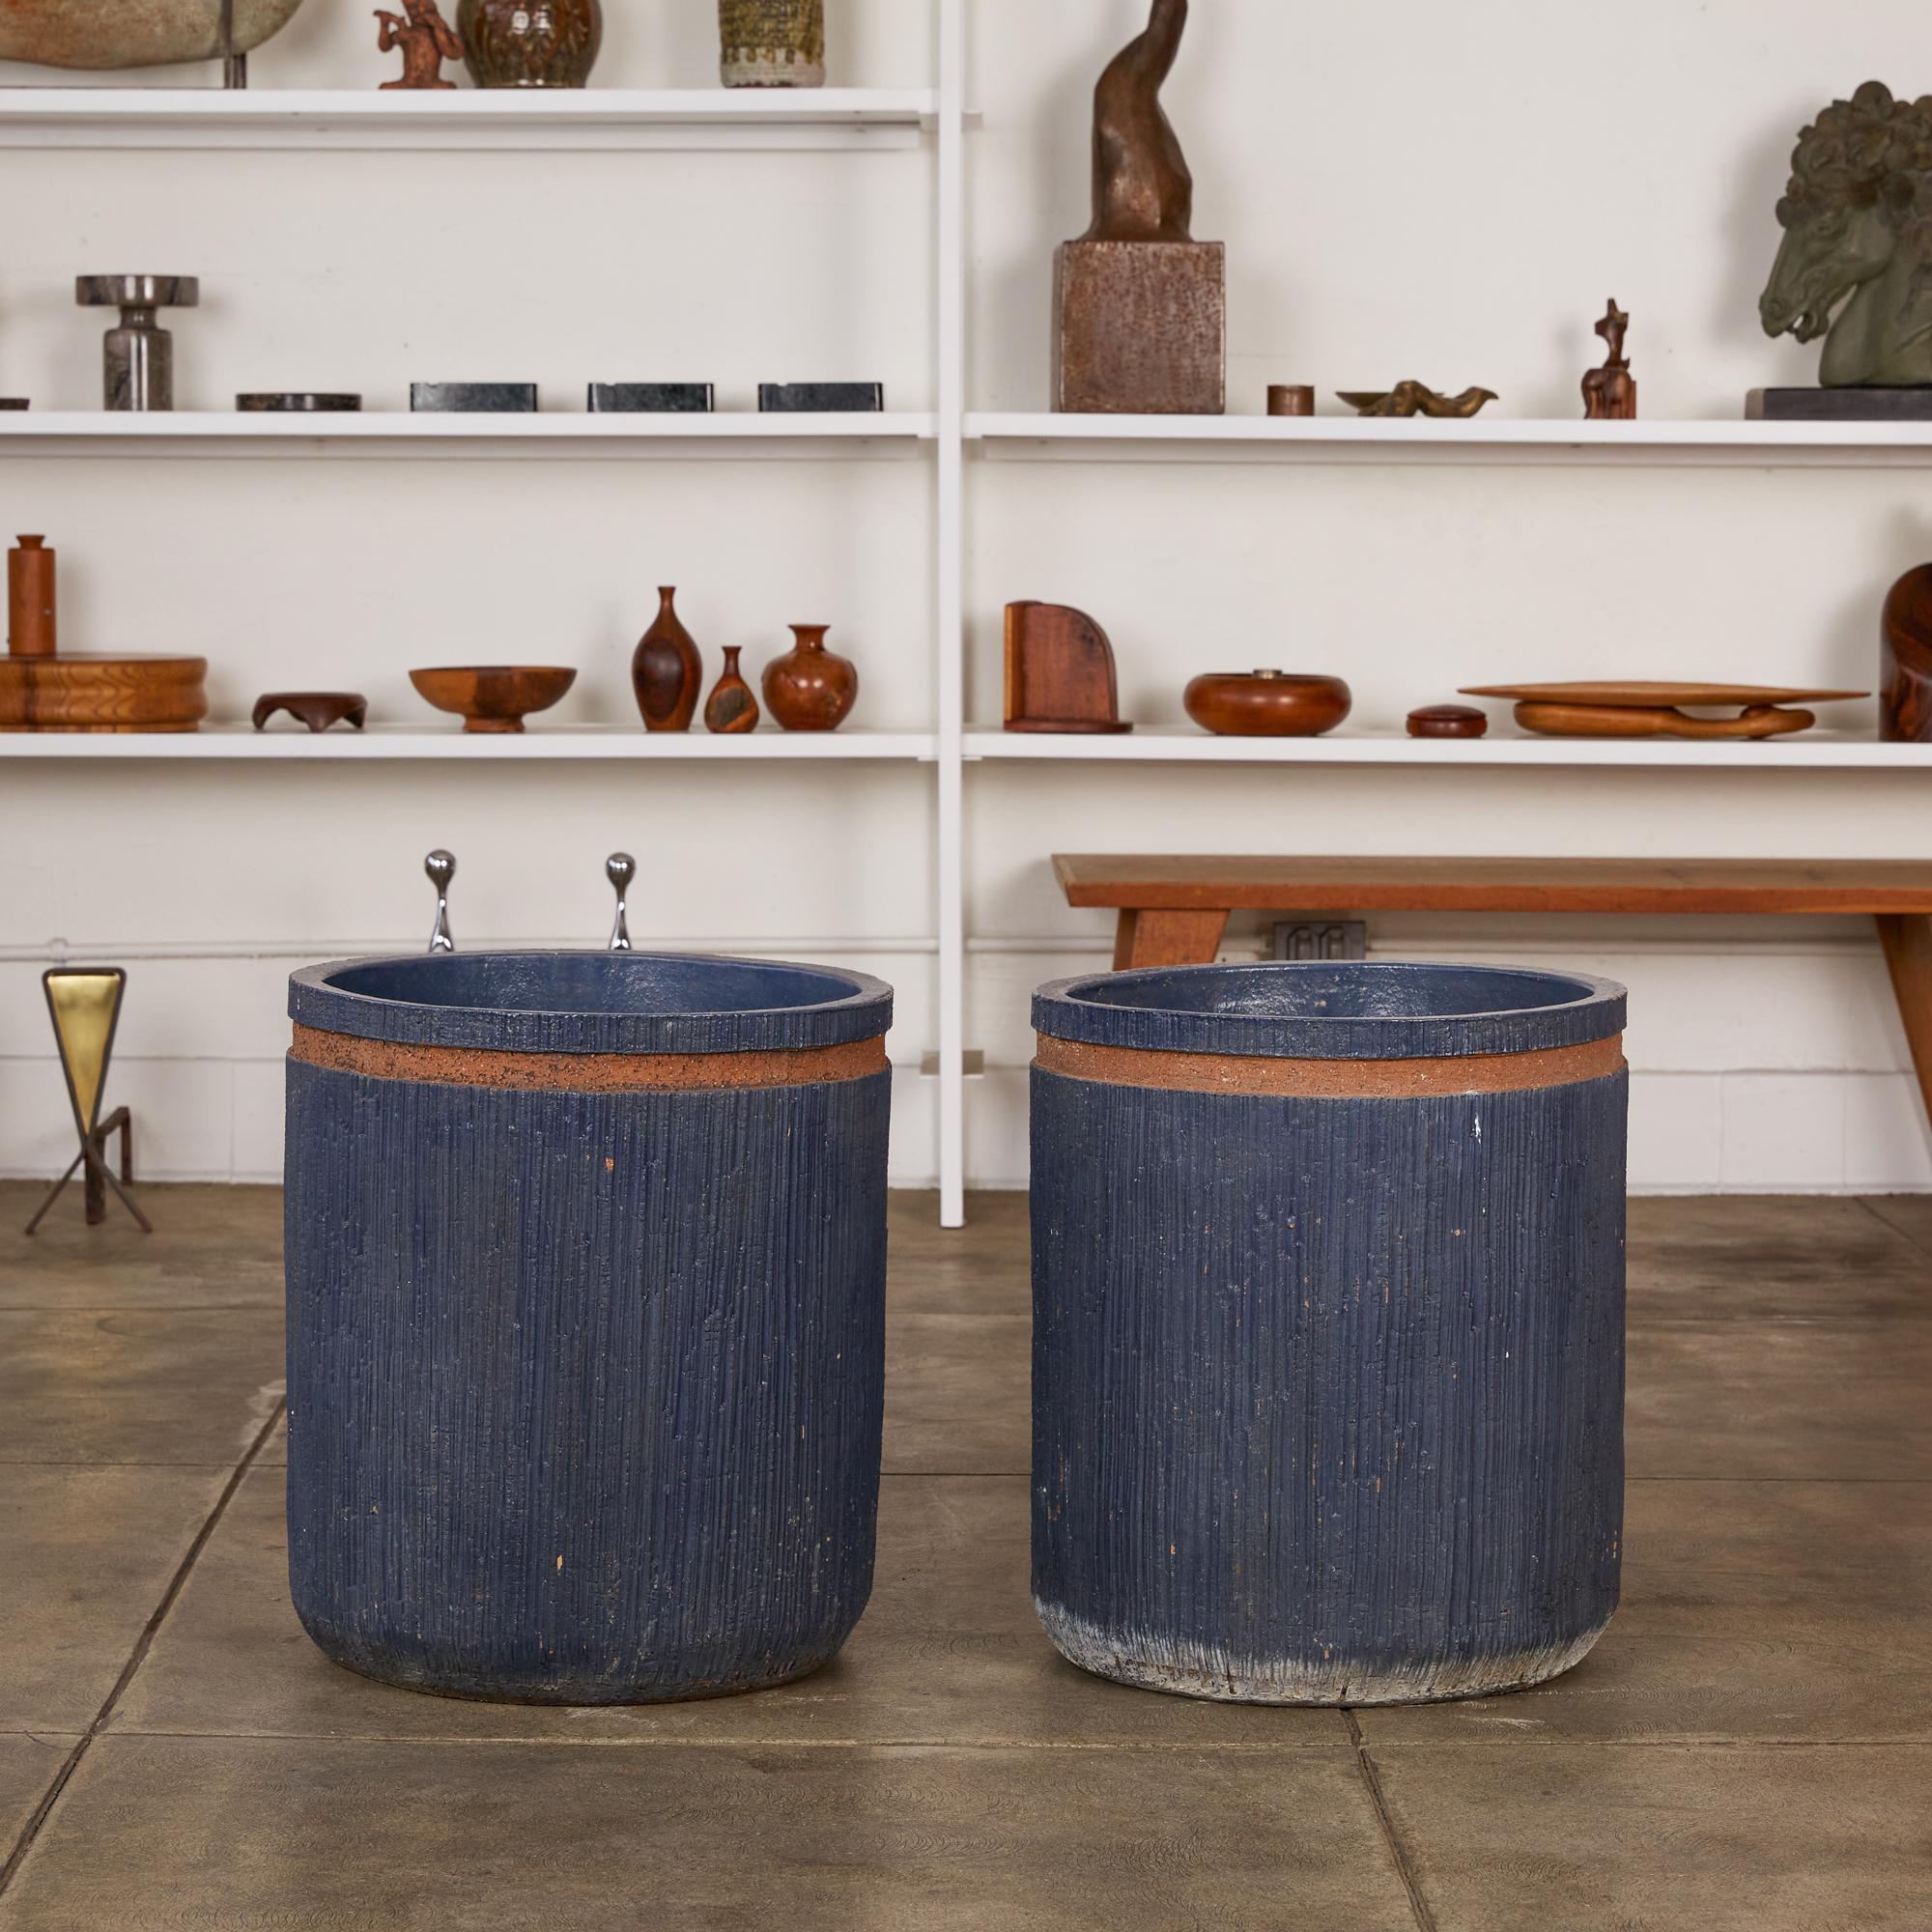 A pair of studio ceramic stoneware planters, c.1982. The stoneware planters are covered in an indigo colored glazed on the interior and exterior of the planter. The exterior is incised with a vertical striation and has a horizontal inset stripe that